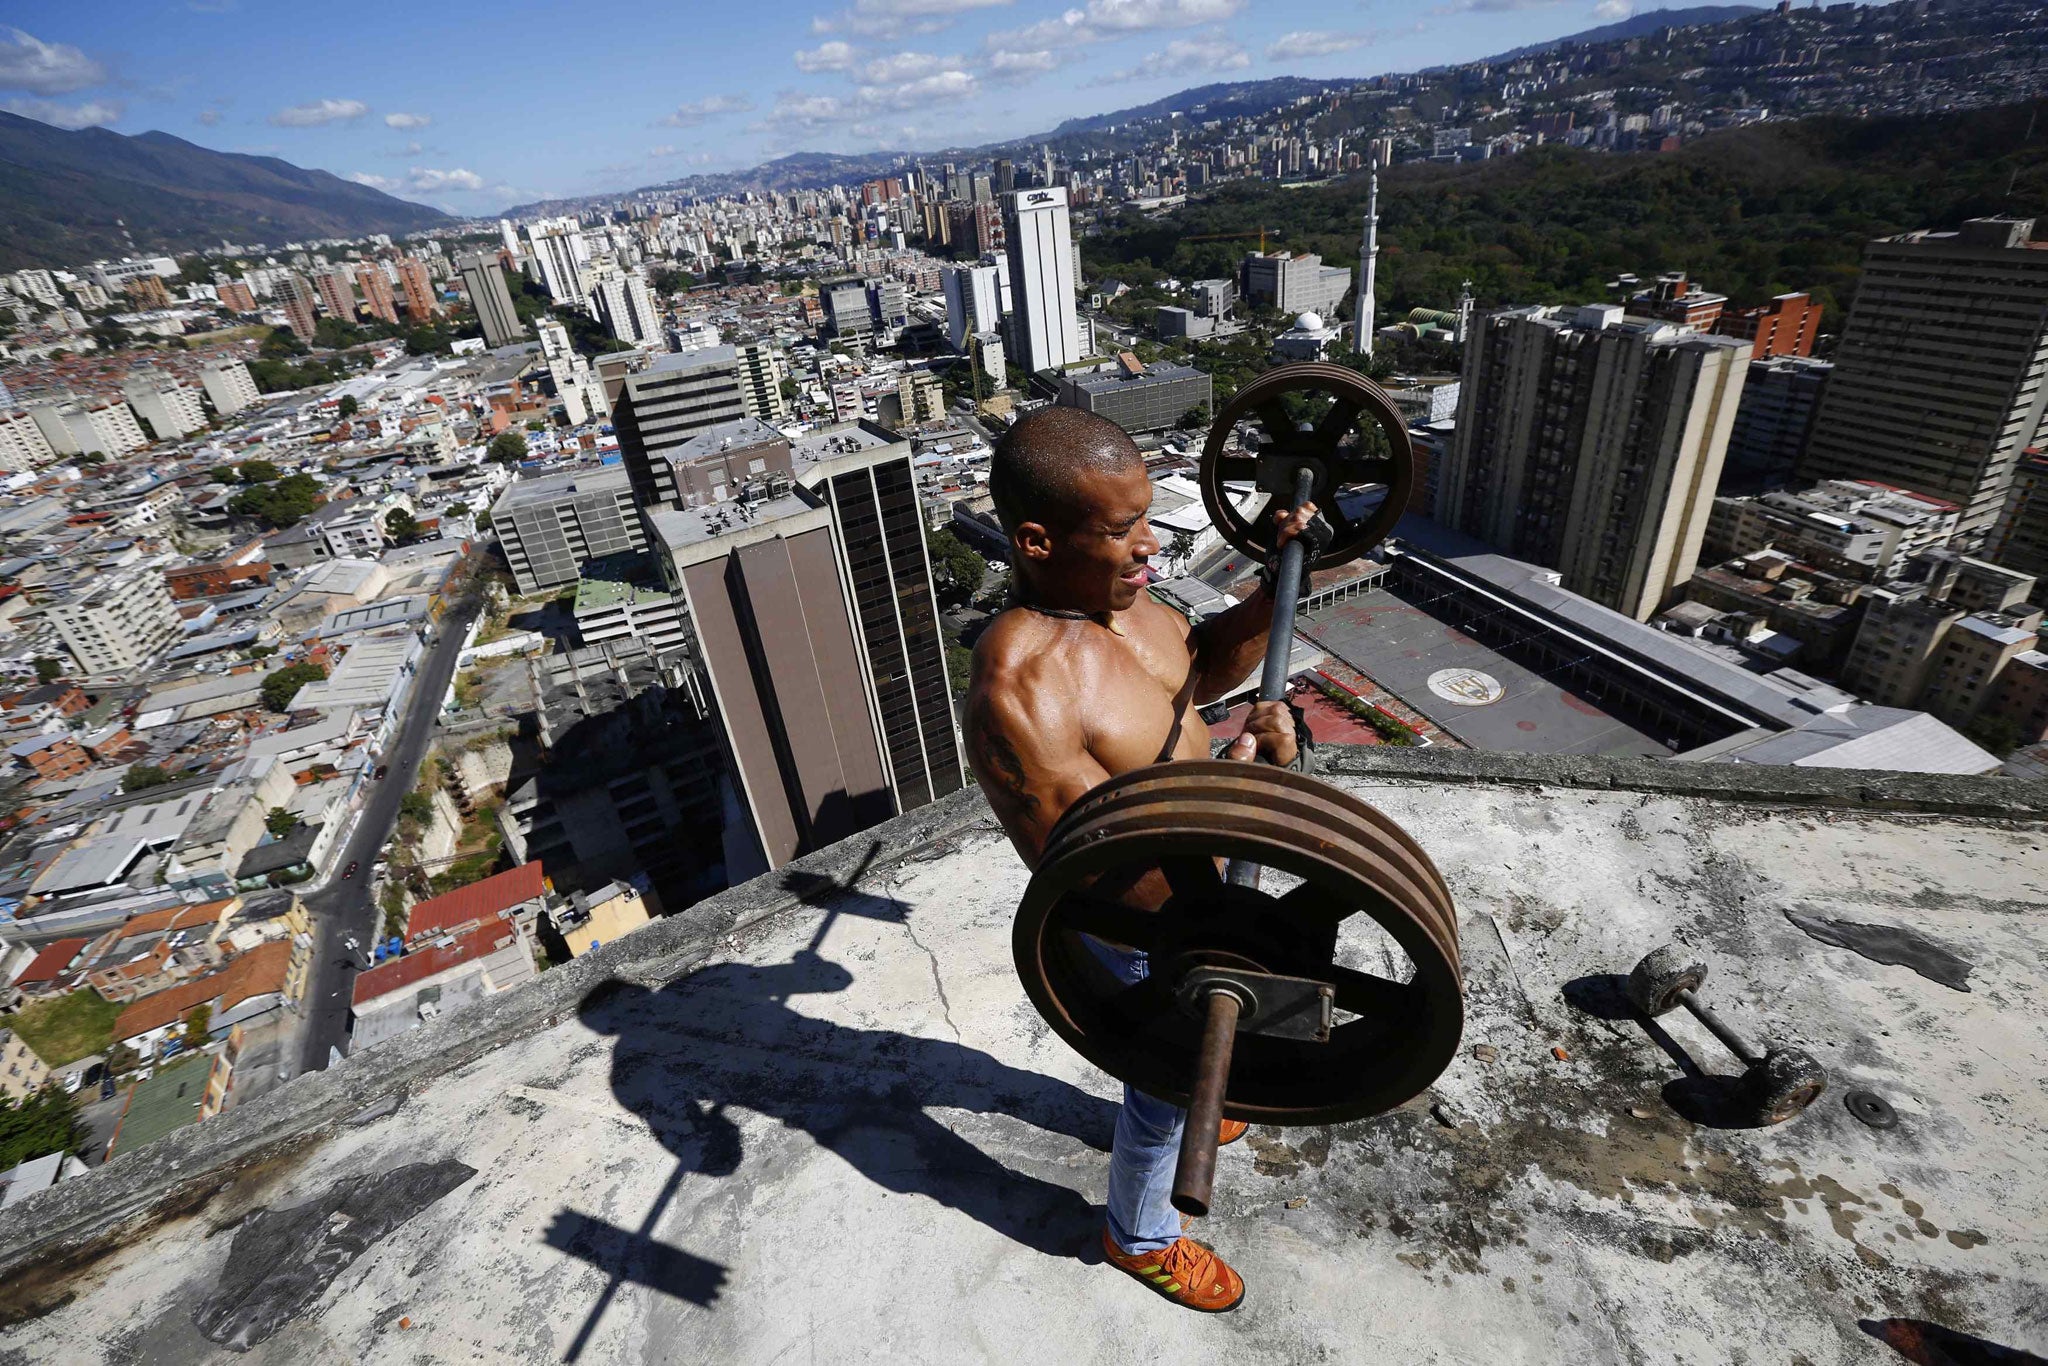 Gabriel Rivas (30) lifts weights on a balcony on the 28th floor of the 'Tower of David' skyscraper in Caracas 